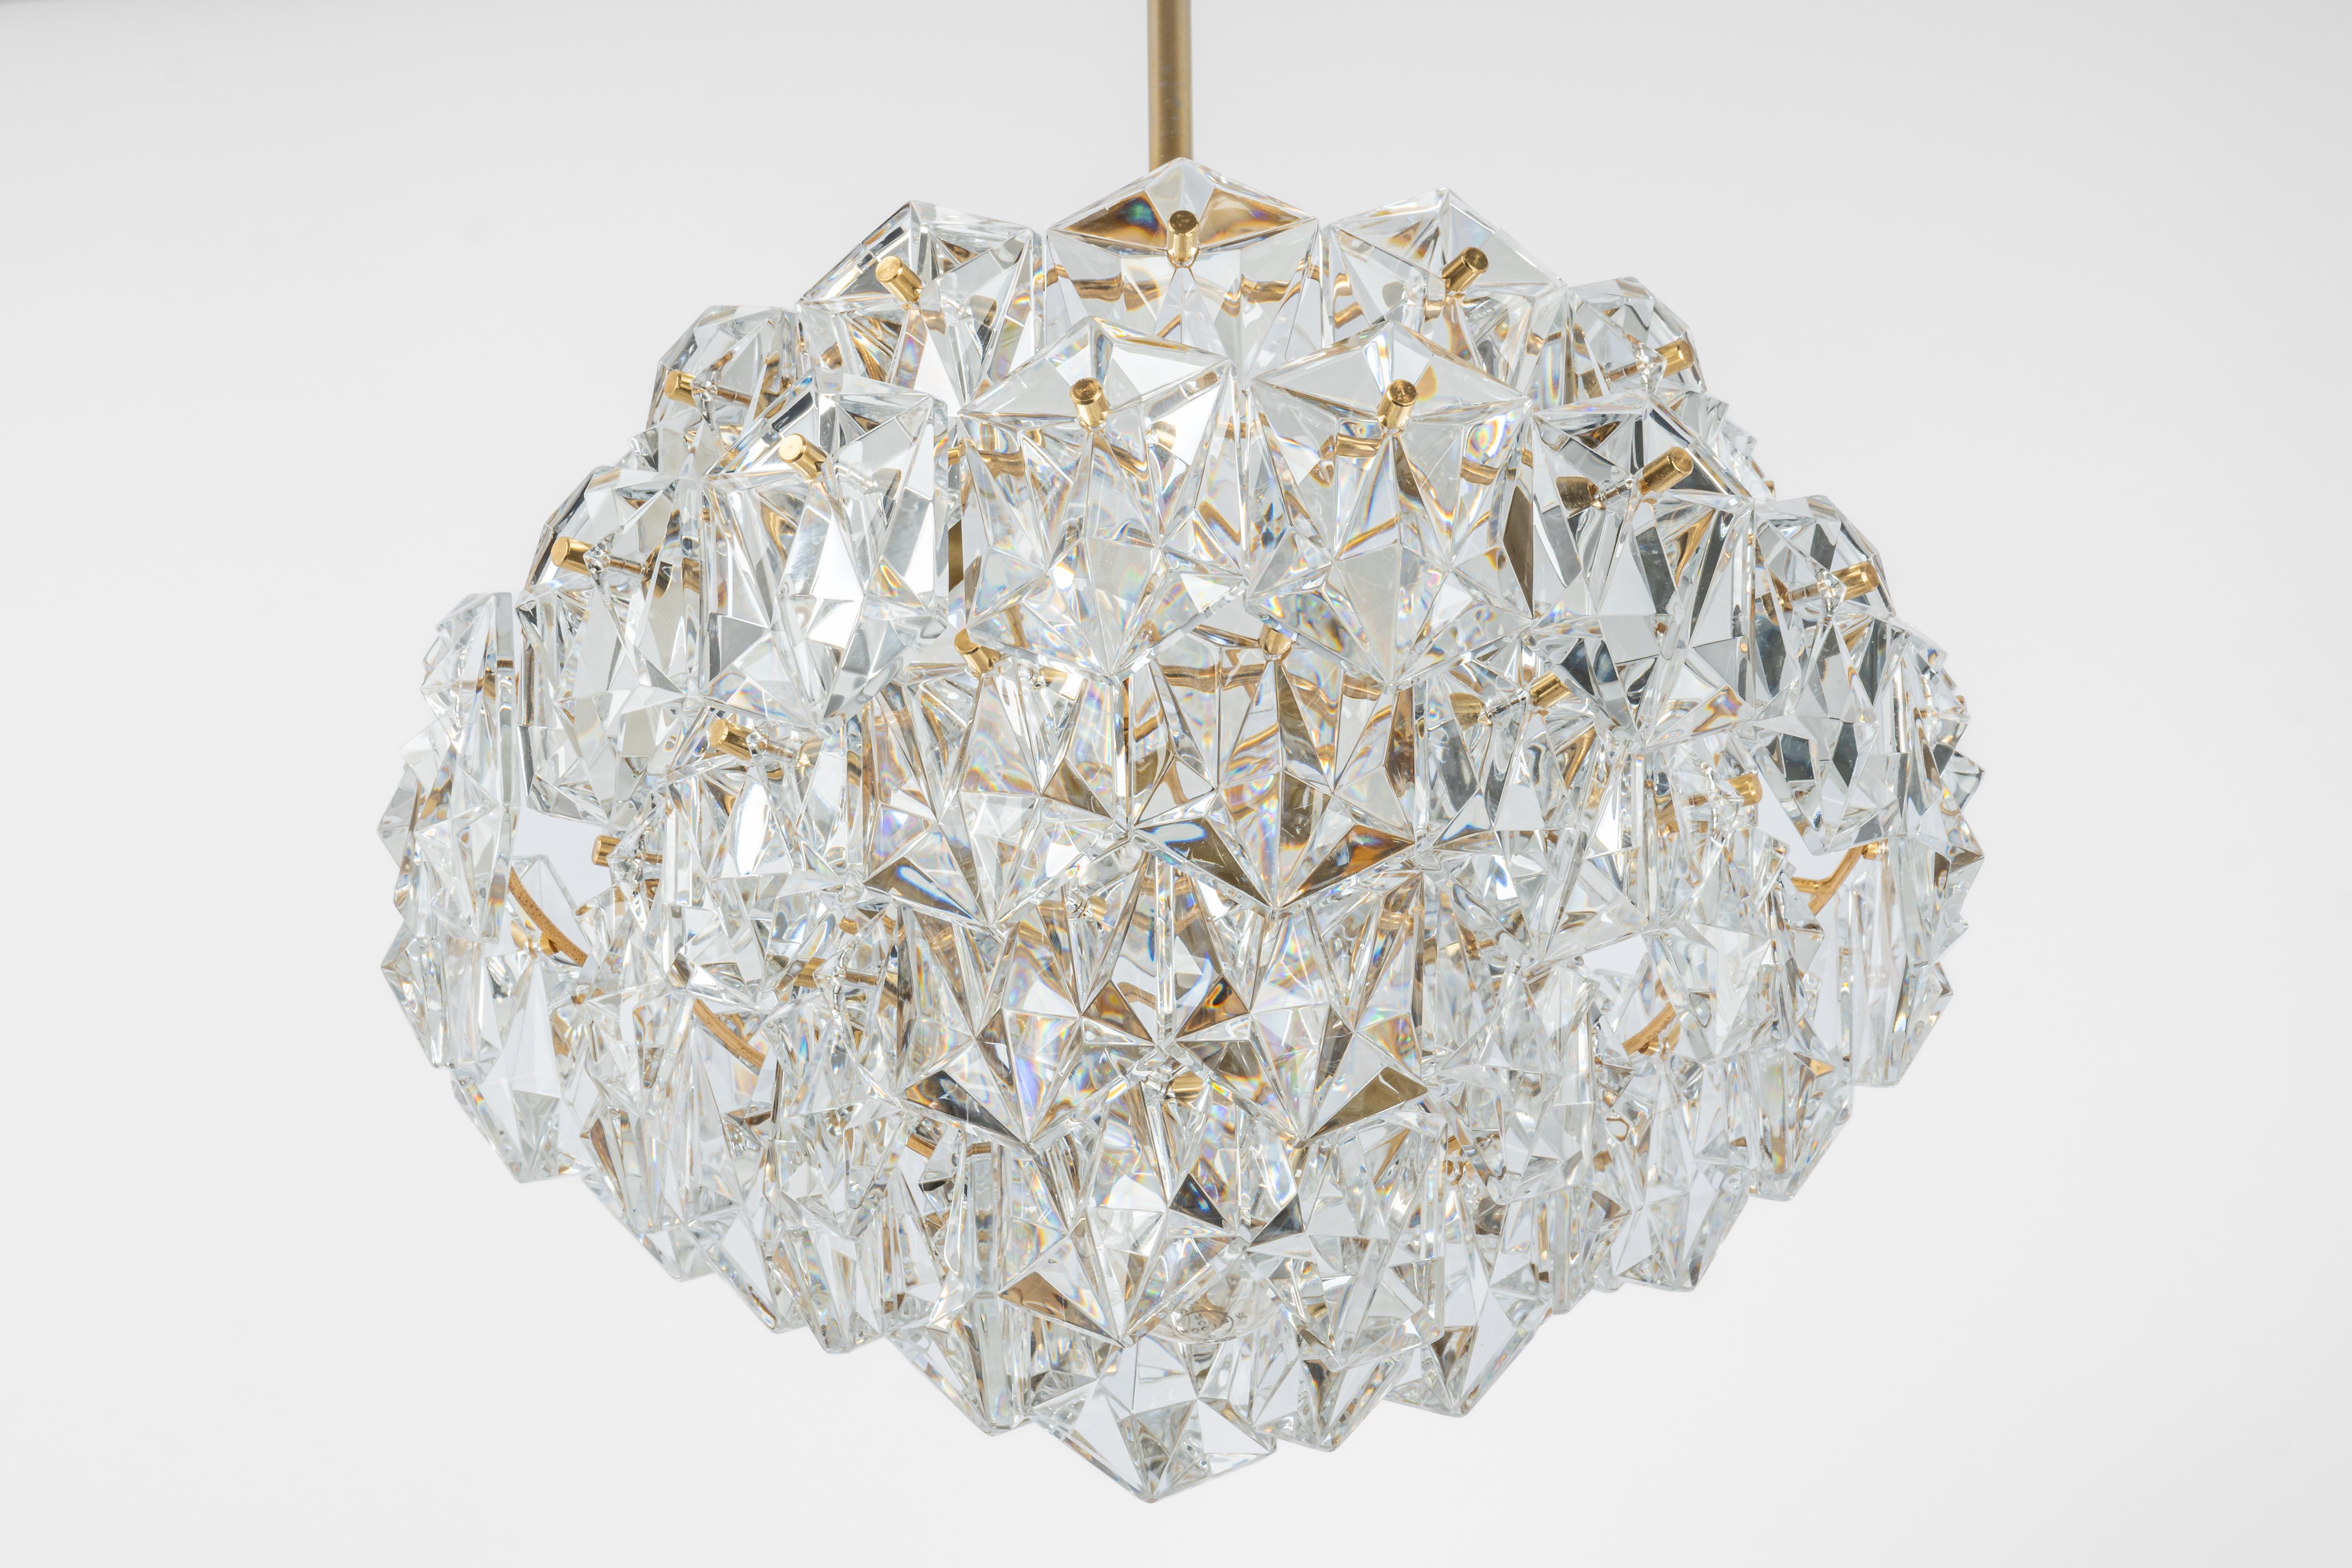 1 of 3 Stunning Chandelier, Brass and Crystal Glass by Kinkeldey, Germany, 1970s For Sale 5